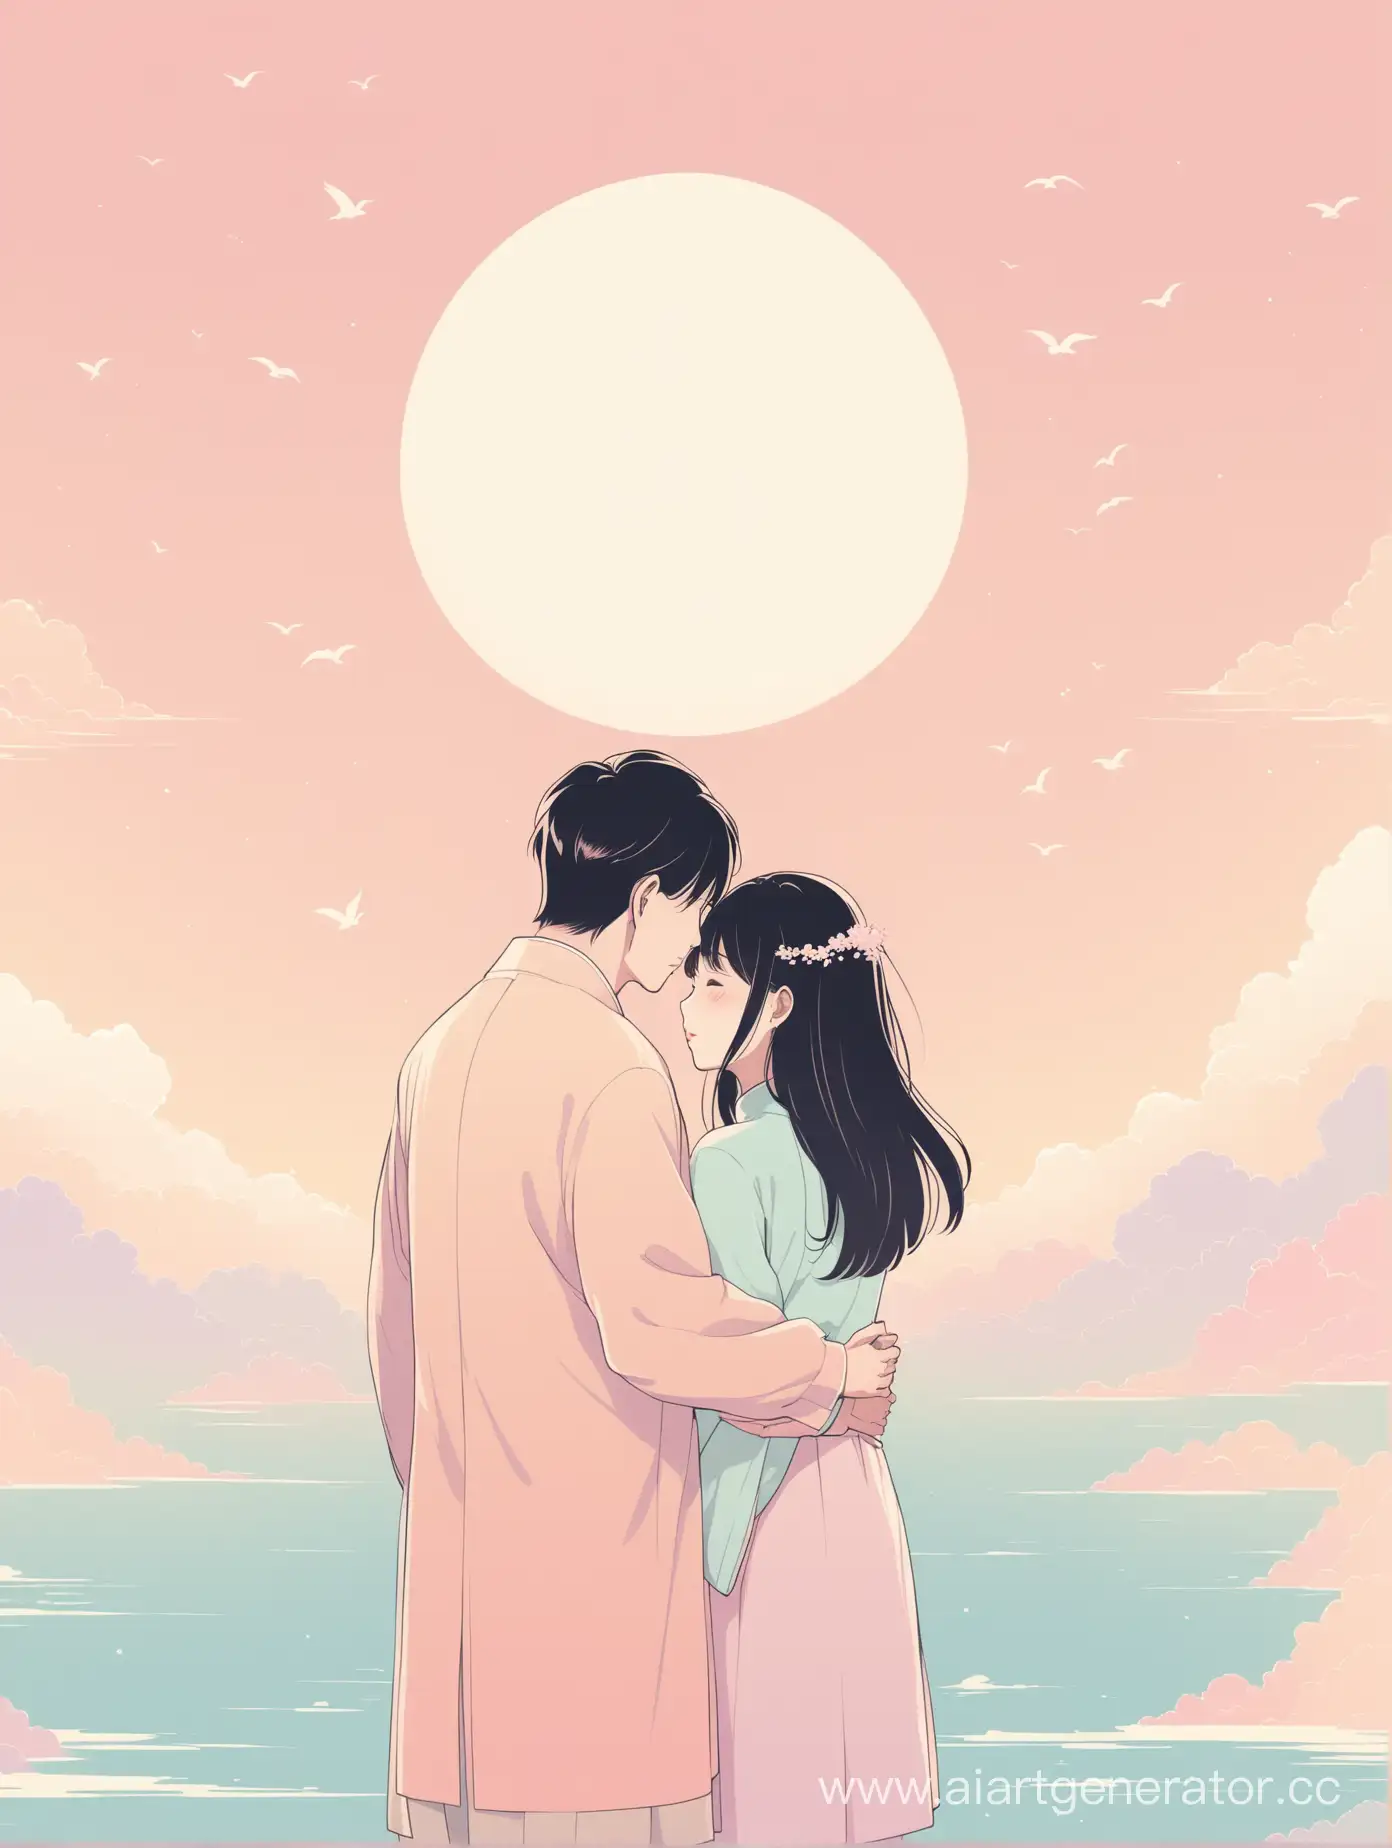 Sad-Asian-Couple-Farewell-in-Asian-Graphic-Style-with-Pastel-Tones